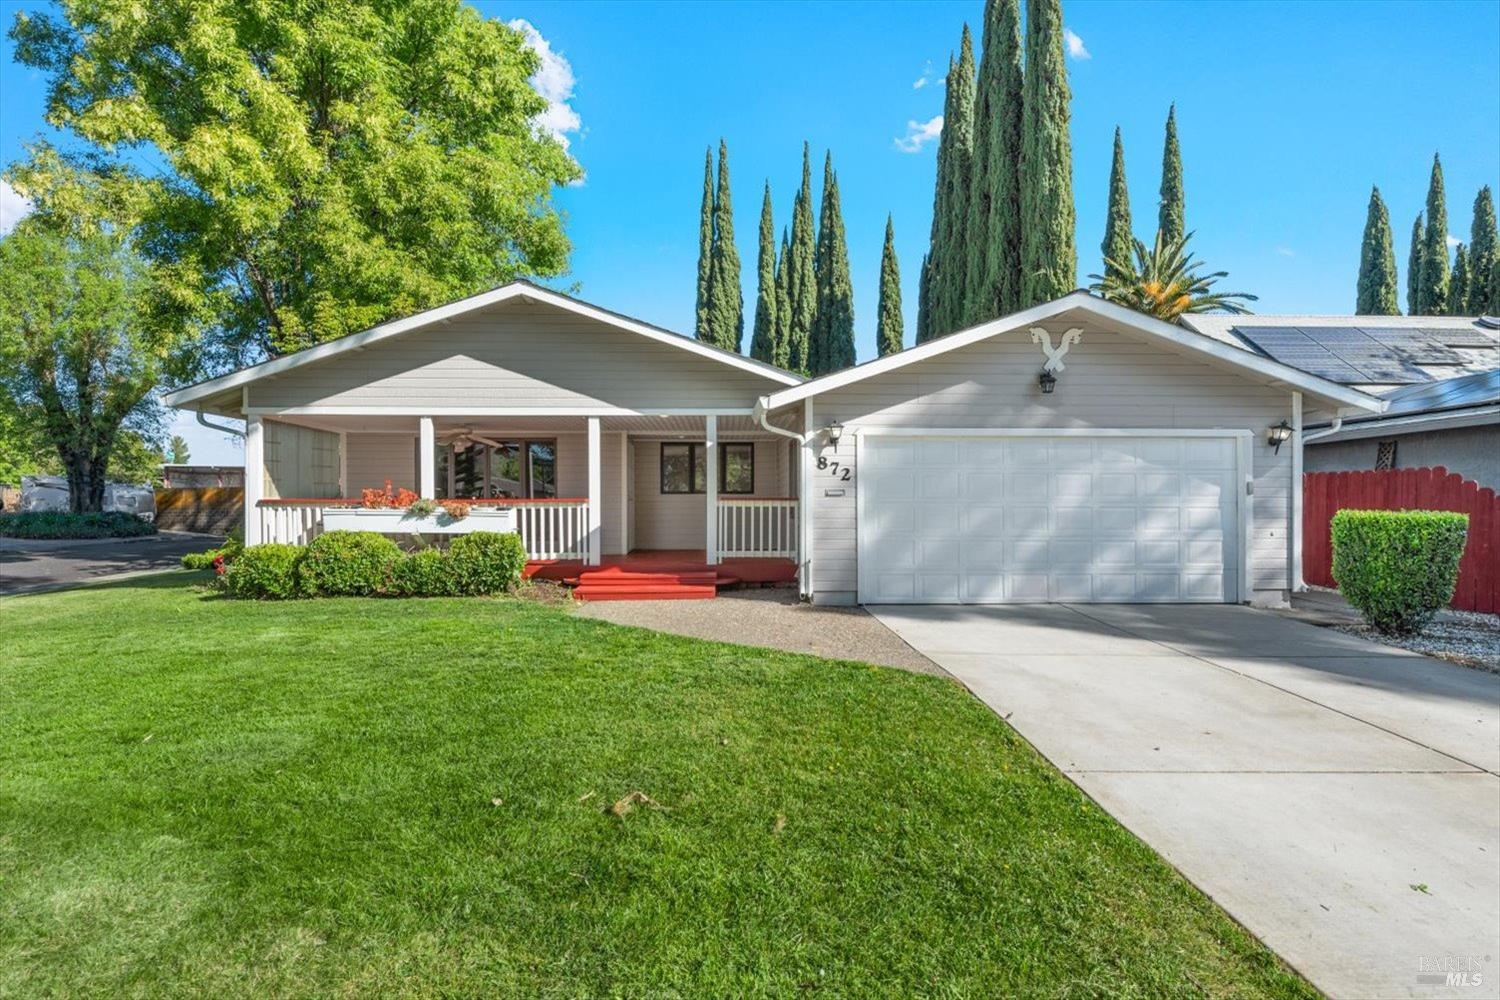 Nestled on a large corner lot, this charming single-story home in Vacaville offers possible RV parki